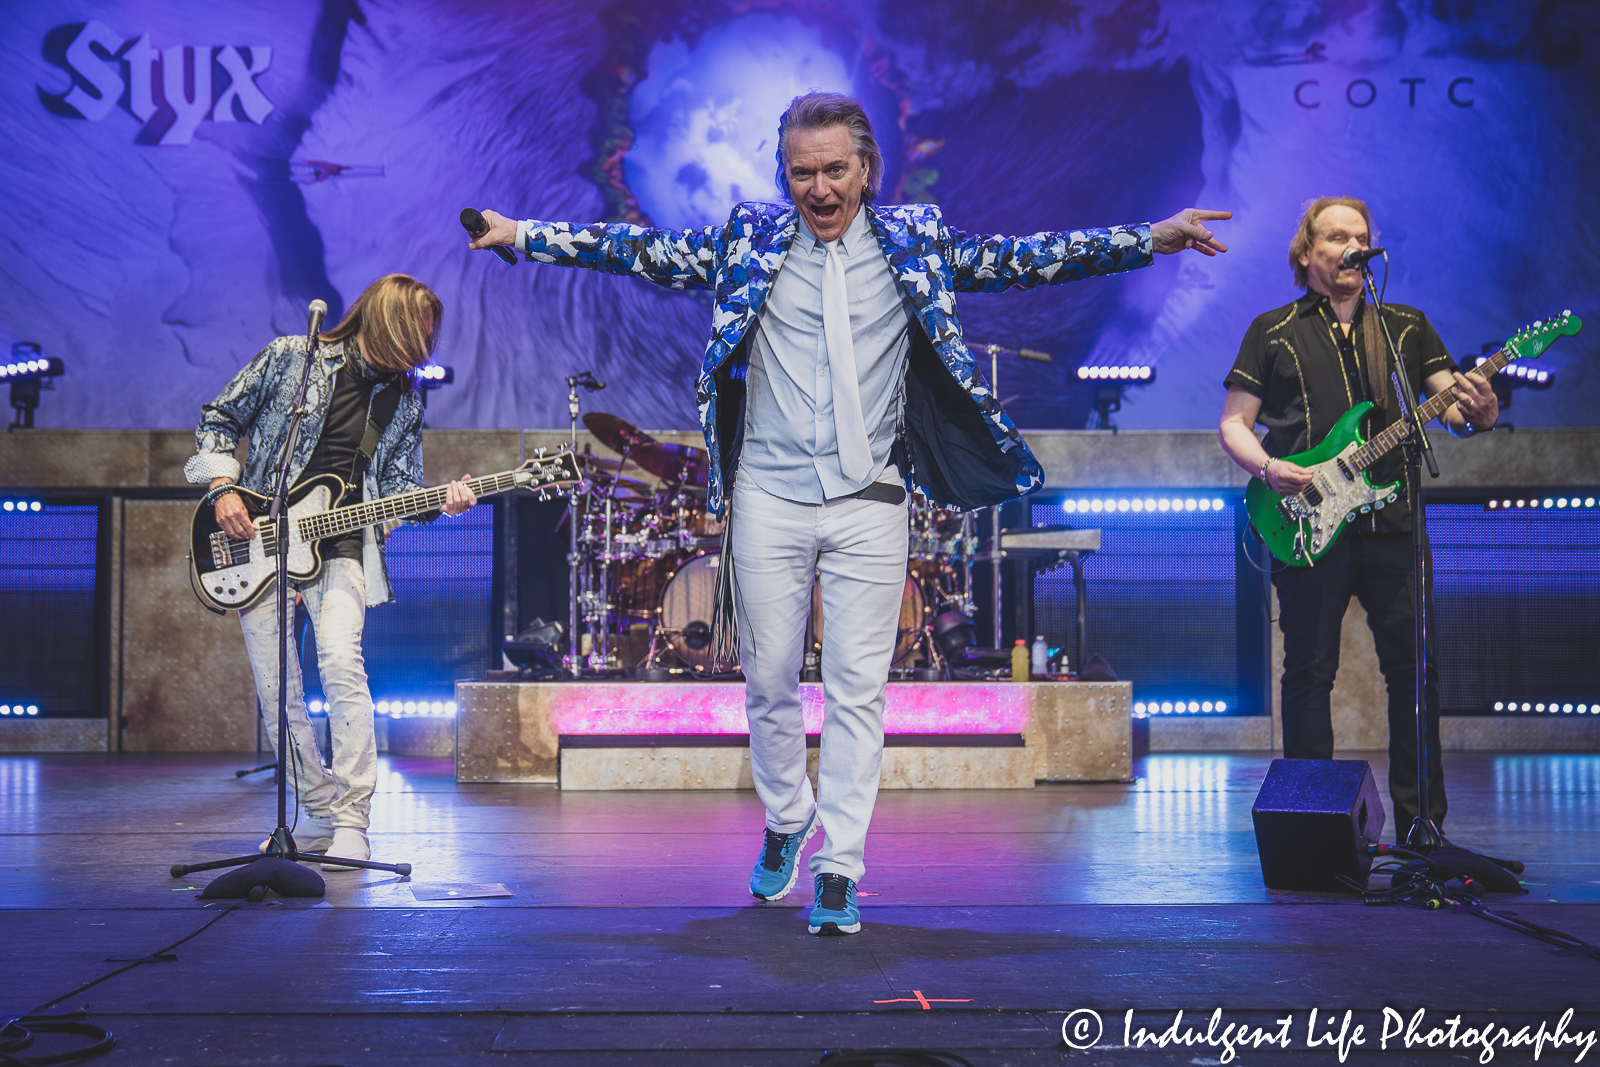 Frontman Lawrence Gowan of Styx performing live with bass player Ricky Phillips and guitarist James "J.Y." Young at Starlight Theatre in Kansas City, MO on June 14, 2022.